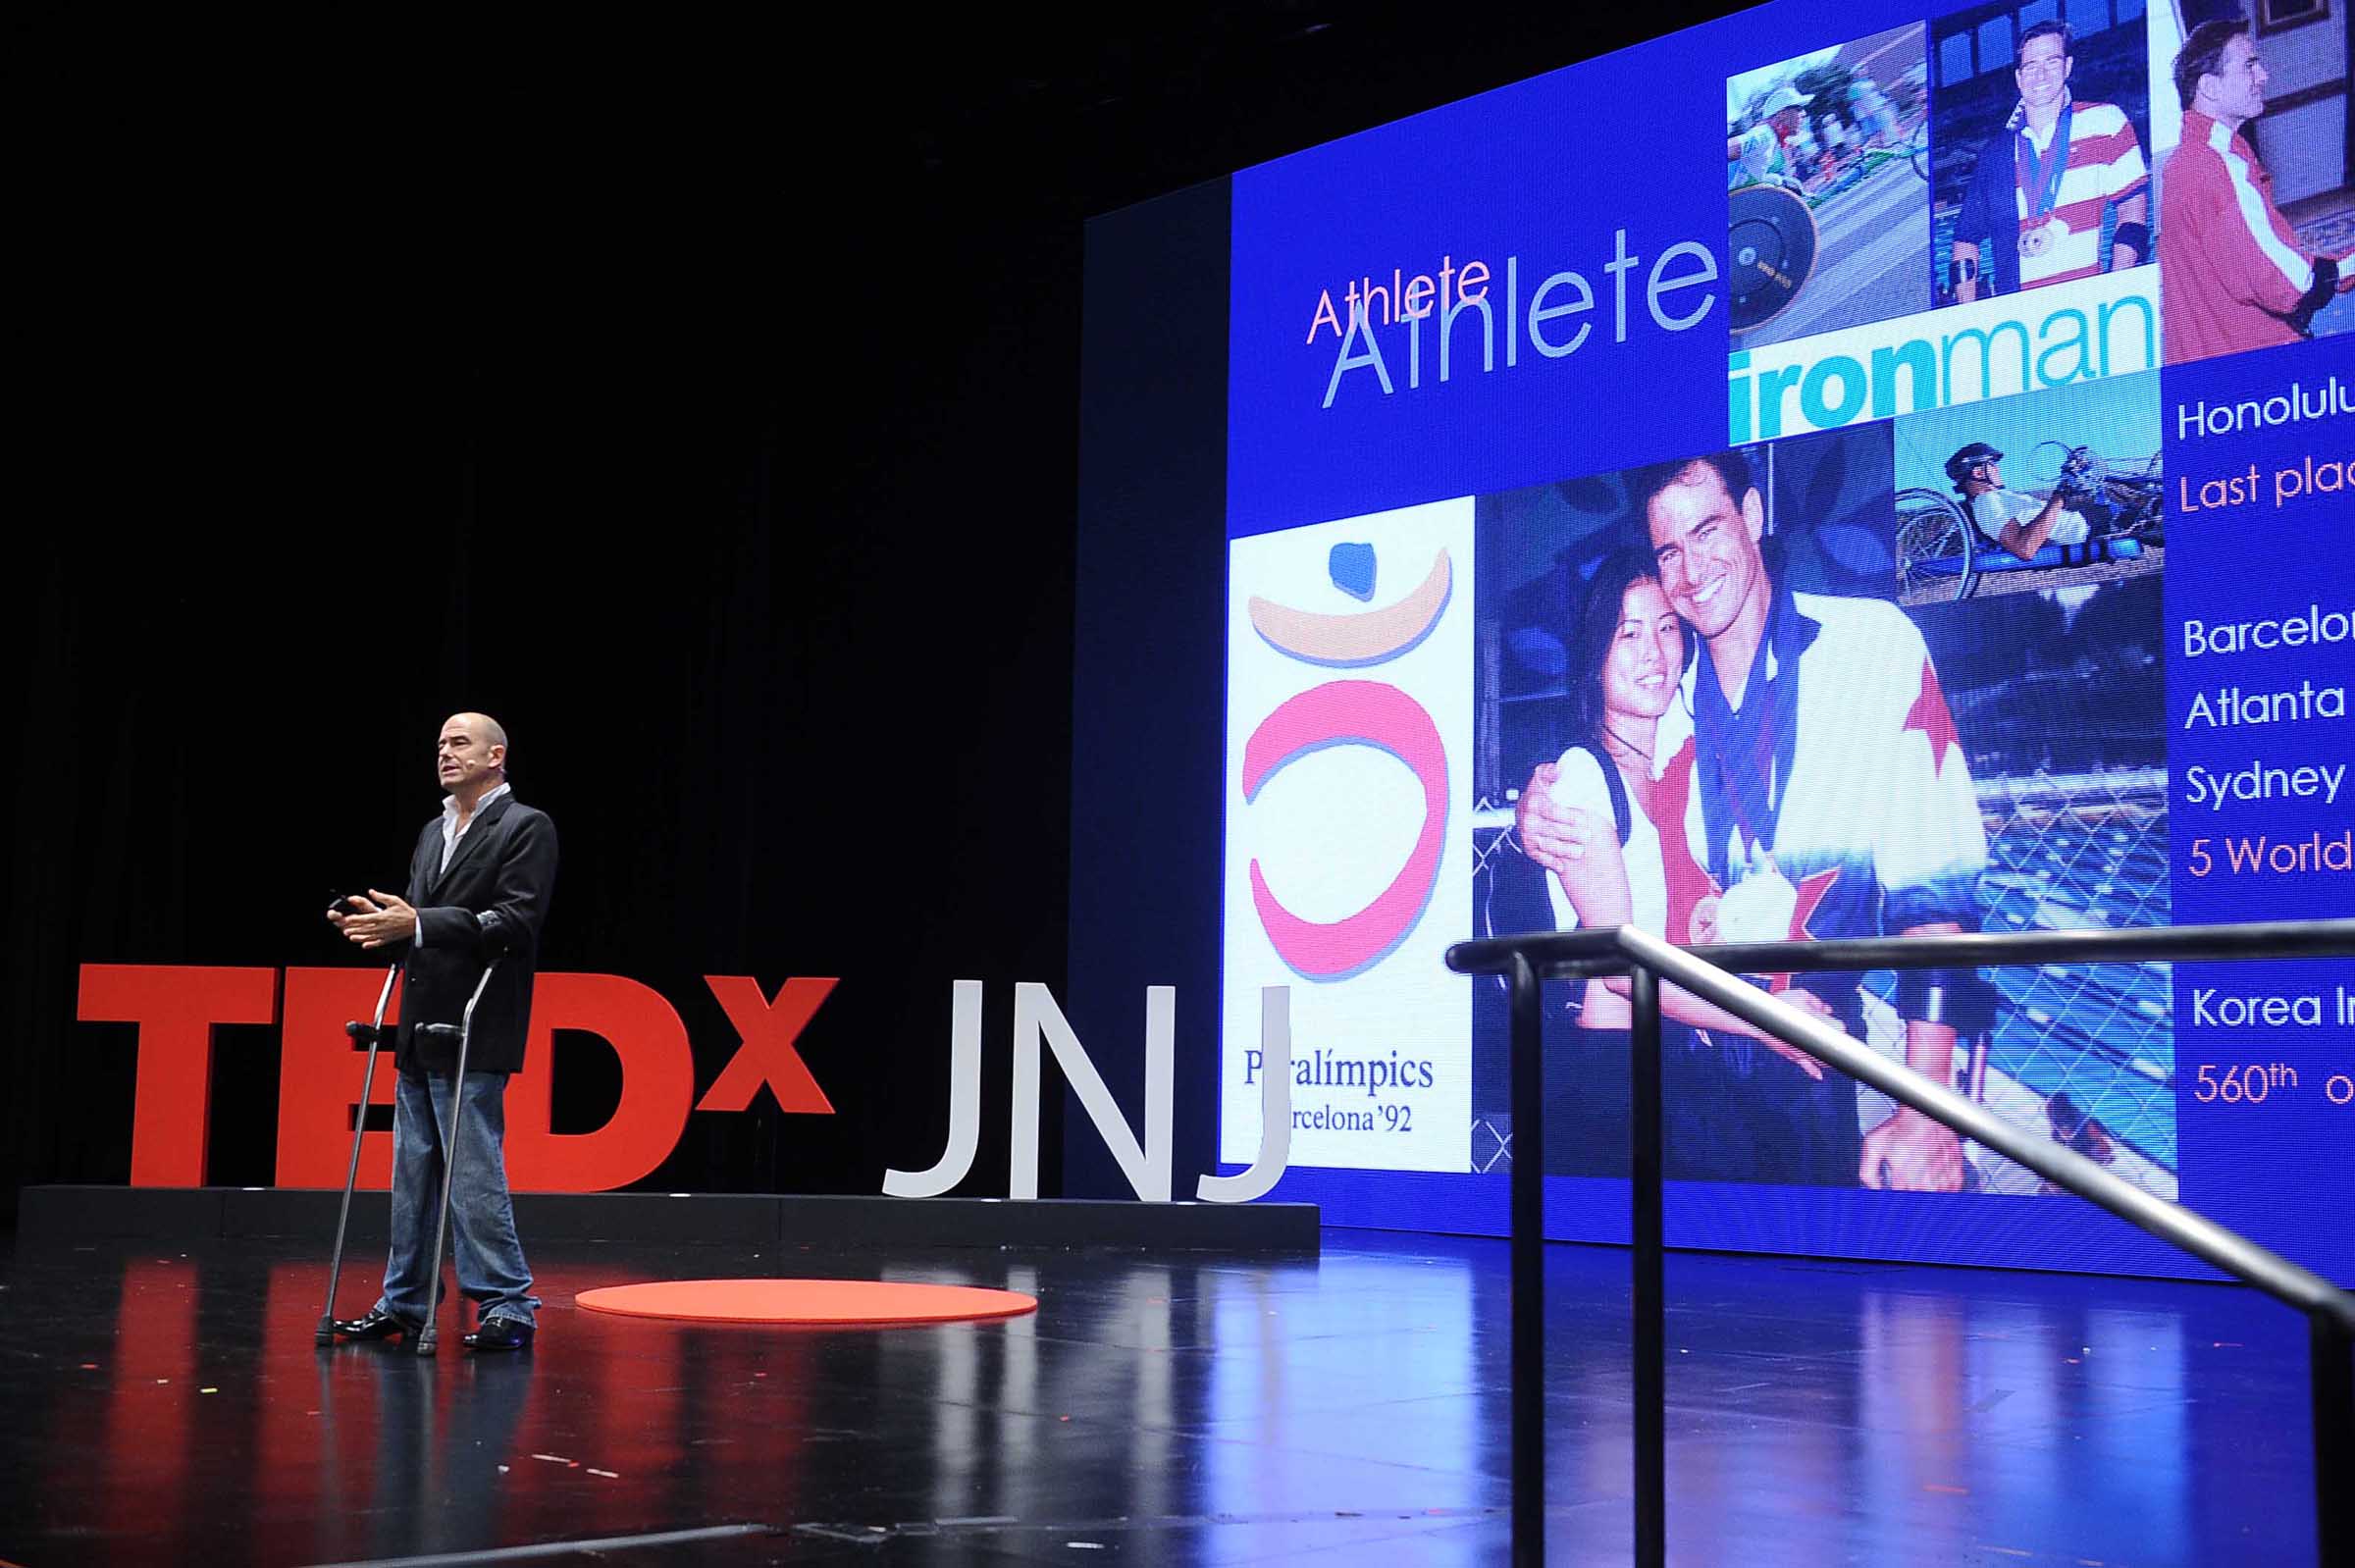 Stamford American Hosts Largest Global TEDx Event